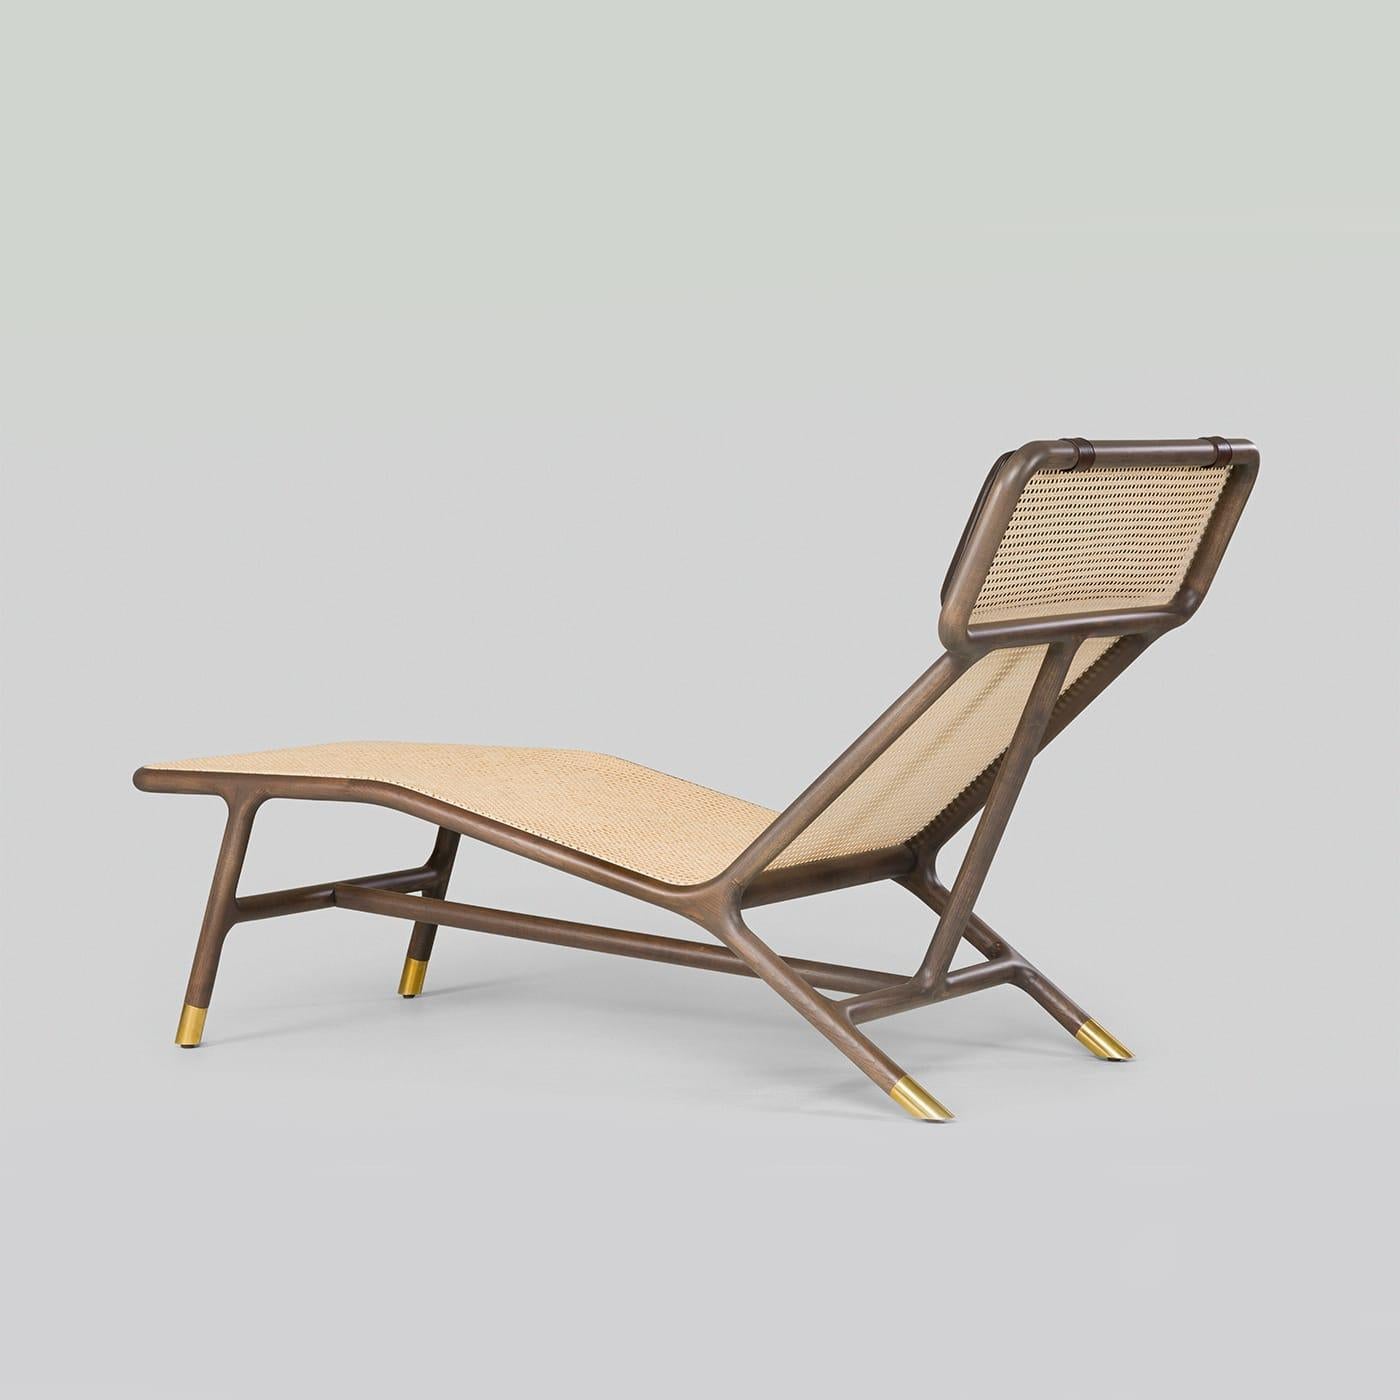 A modern take on a timeless classic, this refined chaise longue boasts a sleek brown ash wood structure with brass detailed feet and an iconic Vienna straw seat. The headrest is enhanced by a padded, brown upholstered cushion conveniently attached